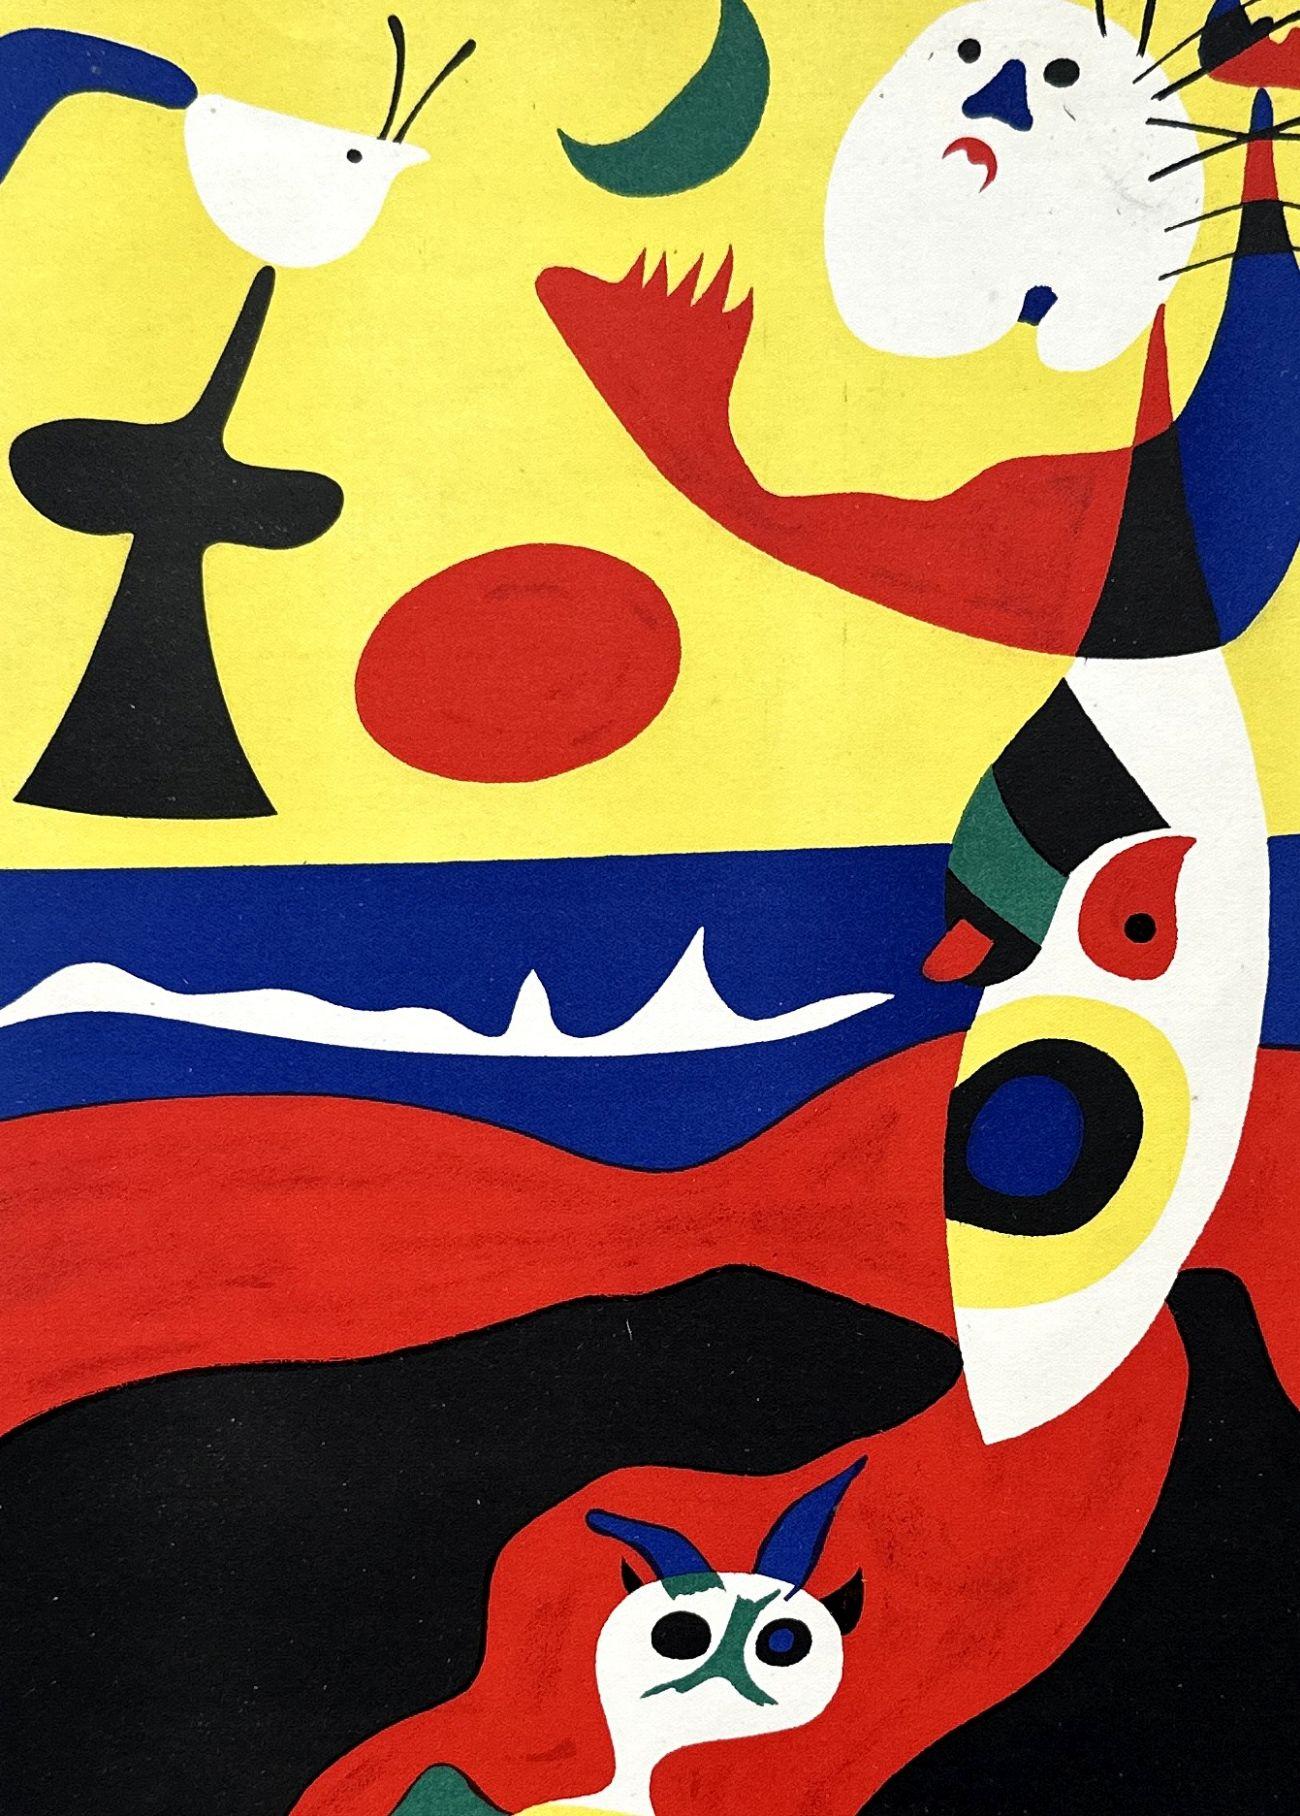 Joan MIRO (1893-1983)
Abstract figures (summer), 1938

Lithograph in colors
Signed in the plate
Printed in Mourlot workshop and published by Teriade for 